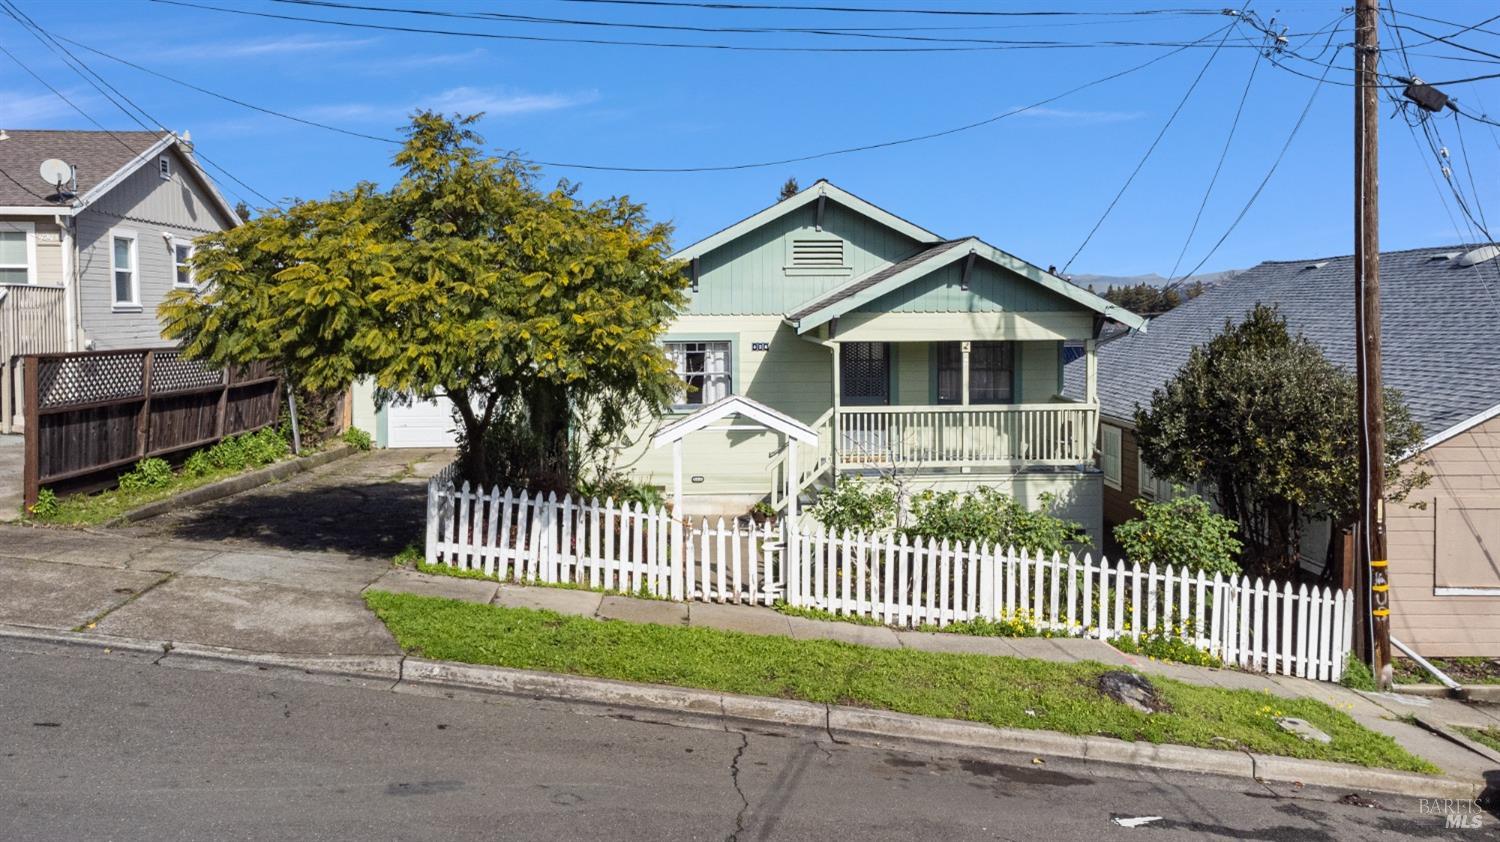 Photo of 426 Coughlan St in Vallejo, CA